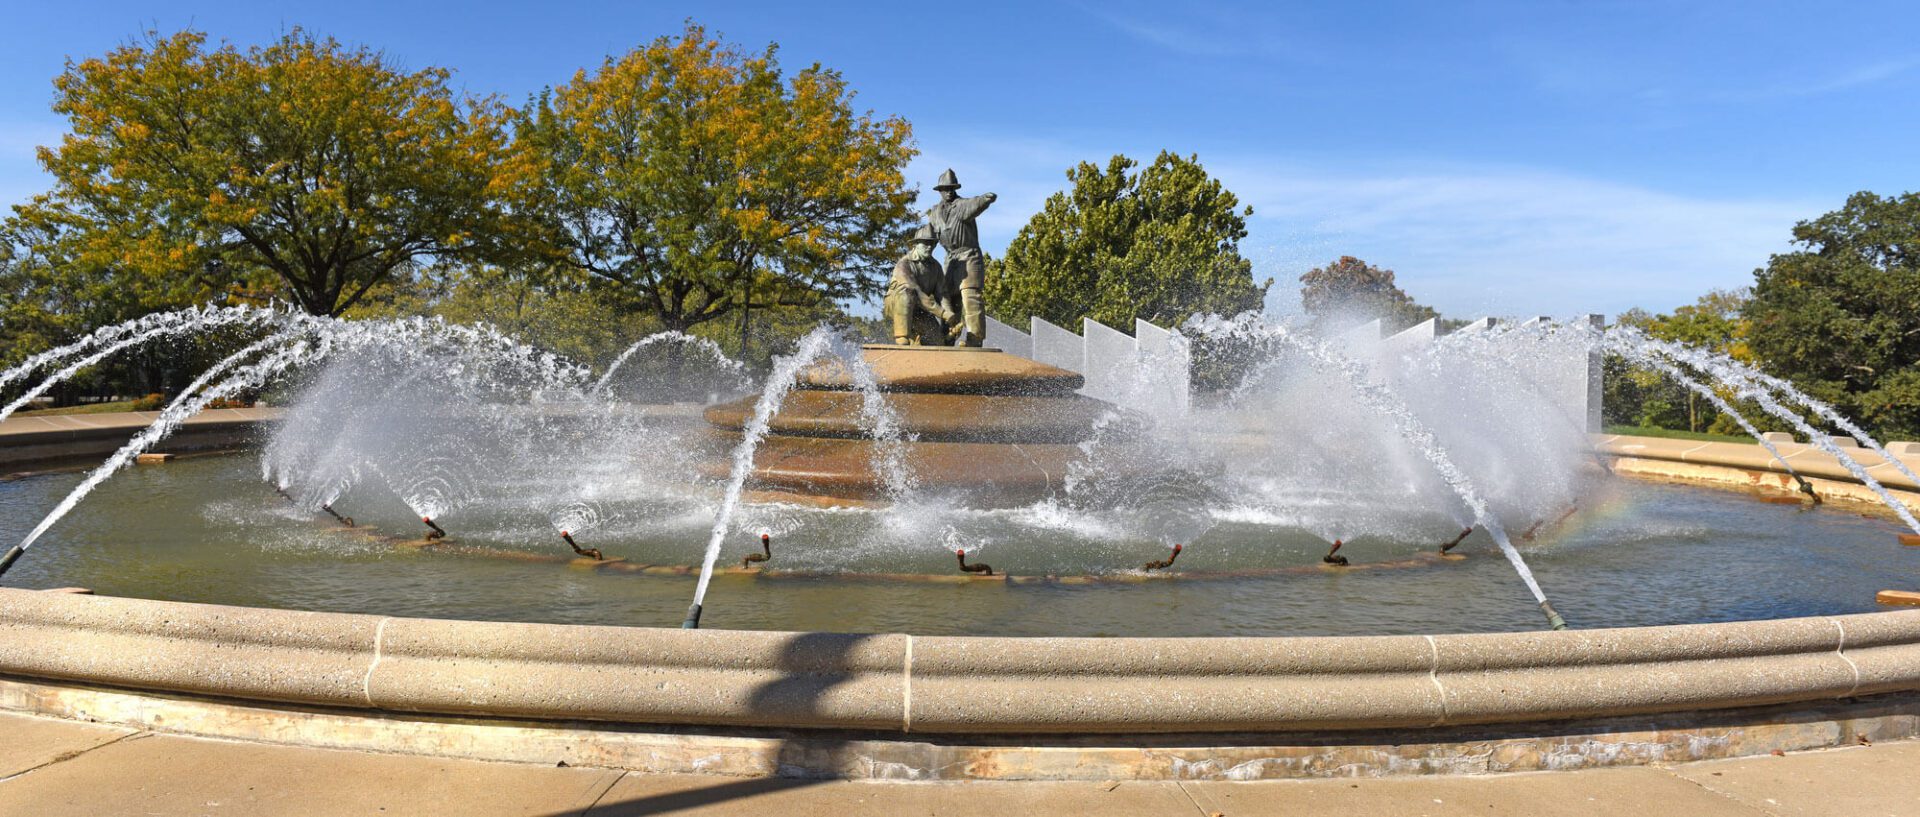 A big fountain with statues in the middle